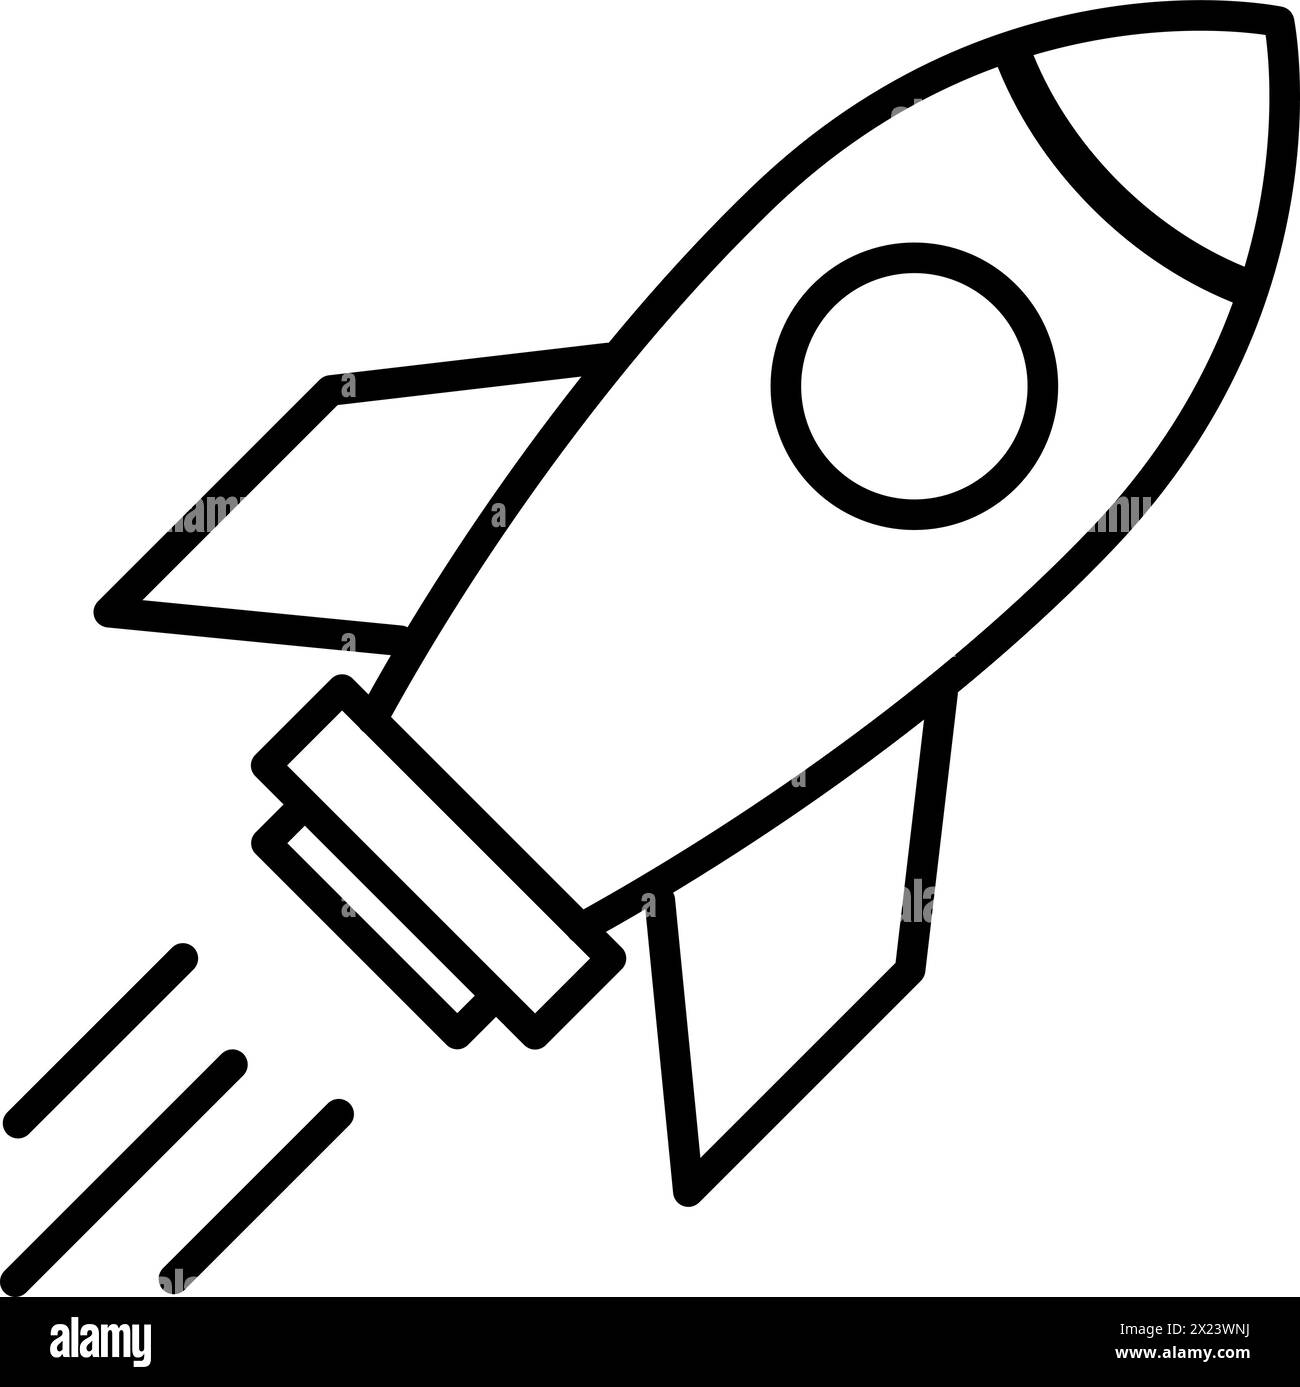 Linear rocket icon as a startup or launch new business concept Stock Vector